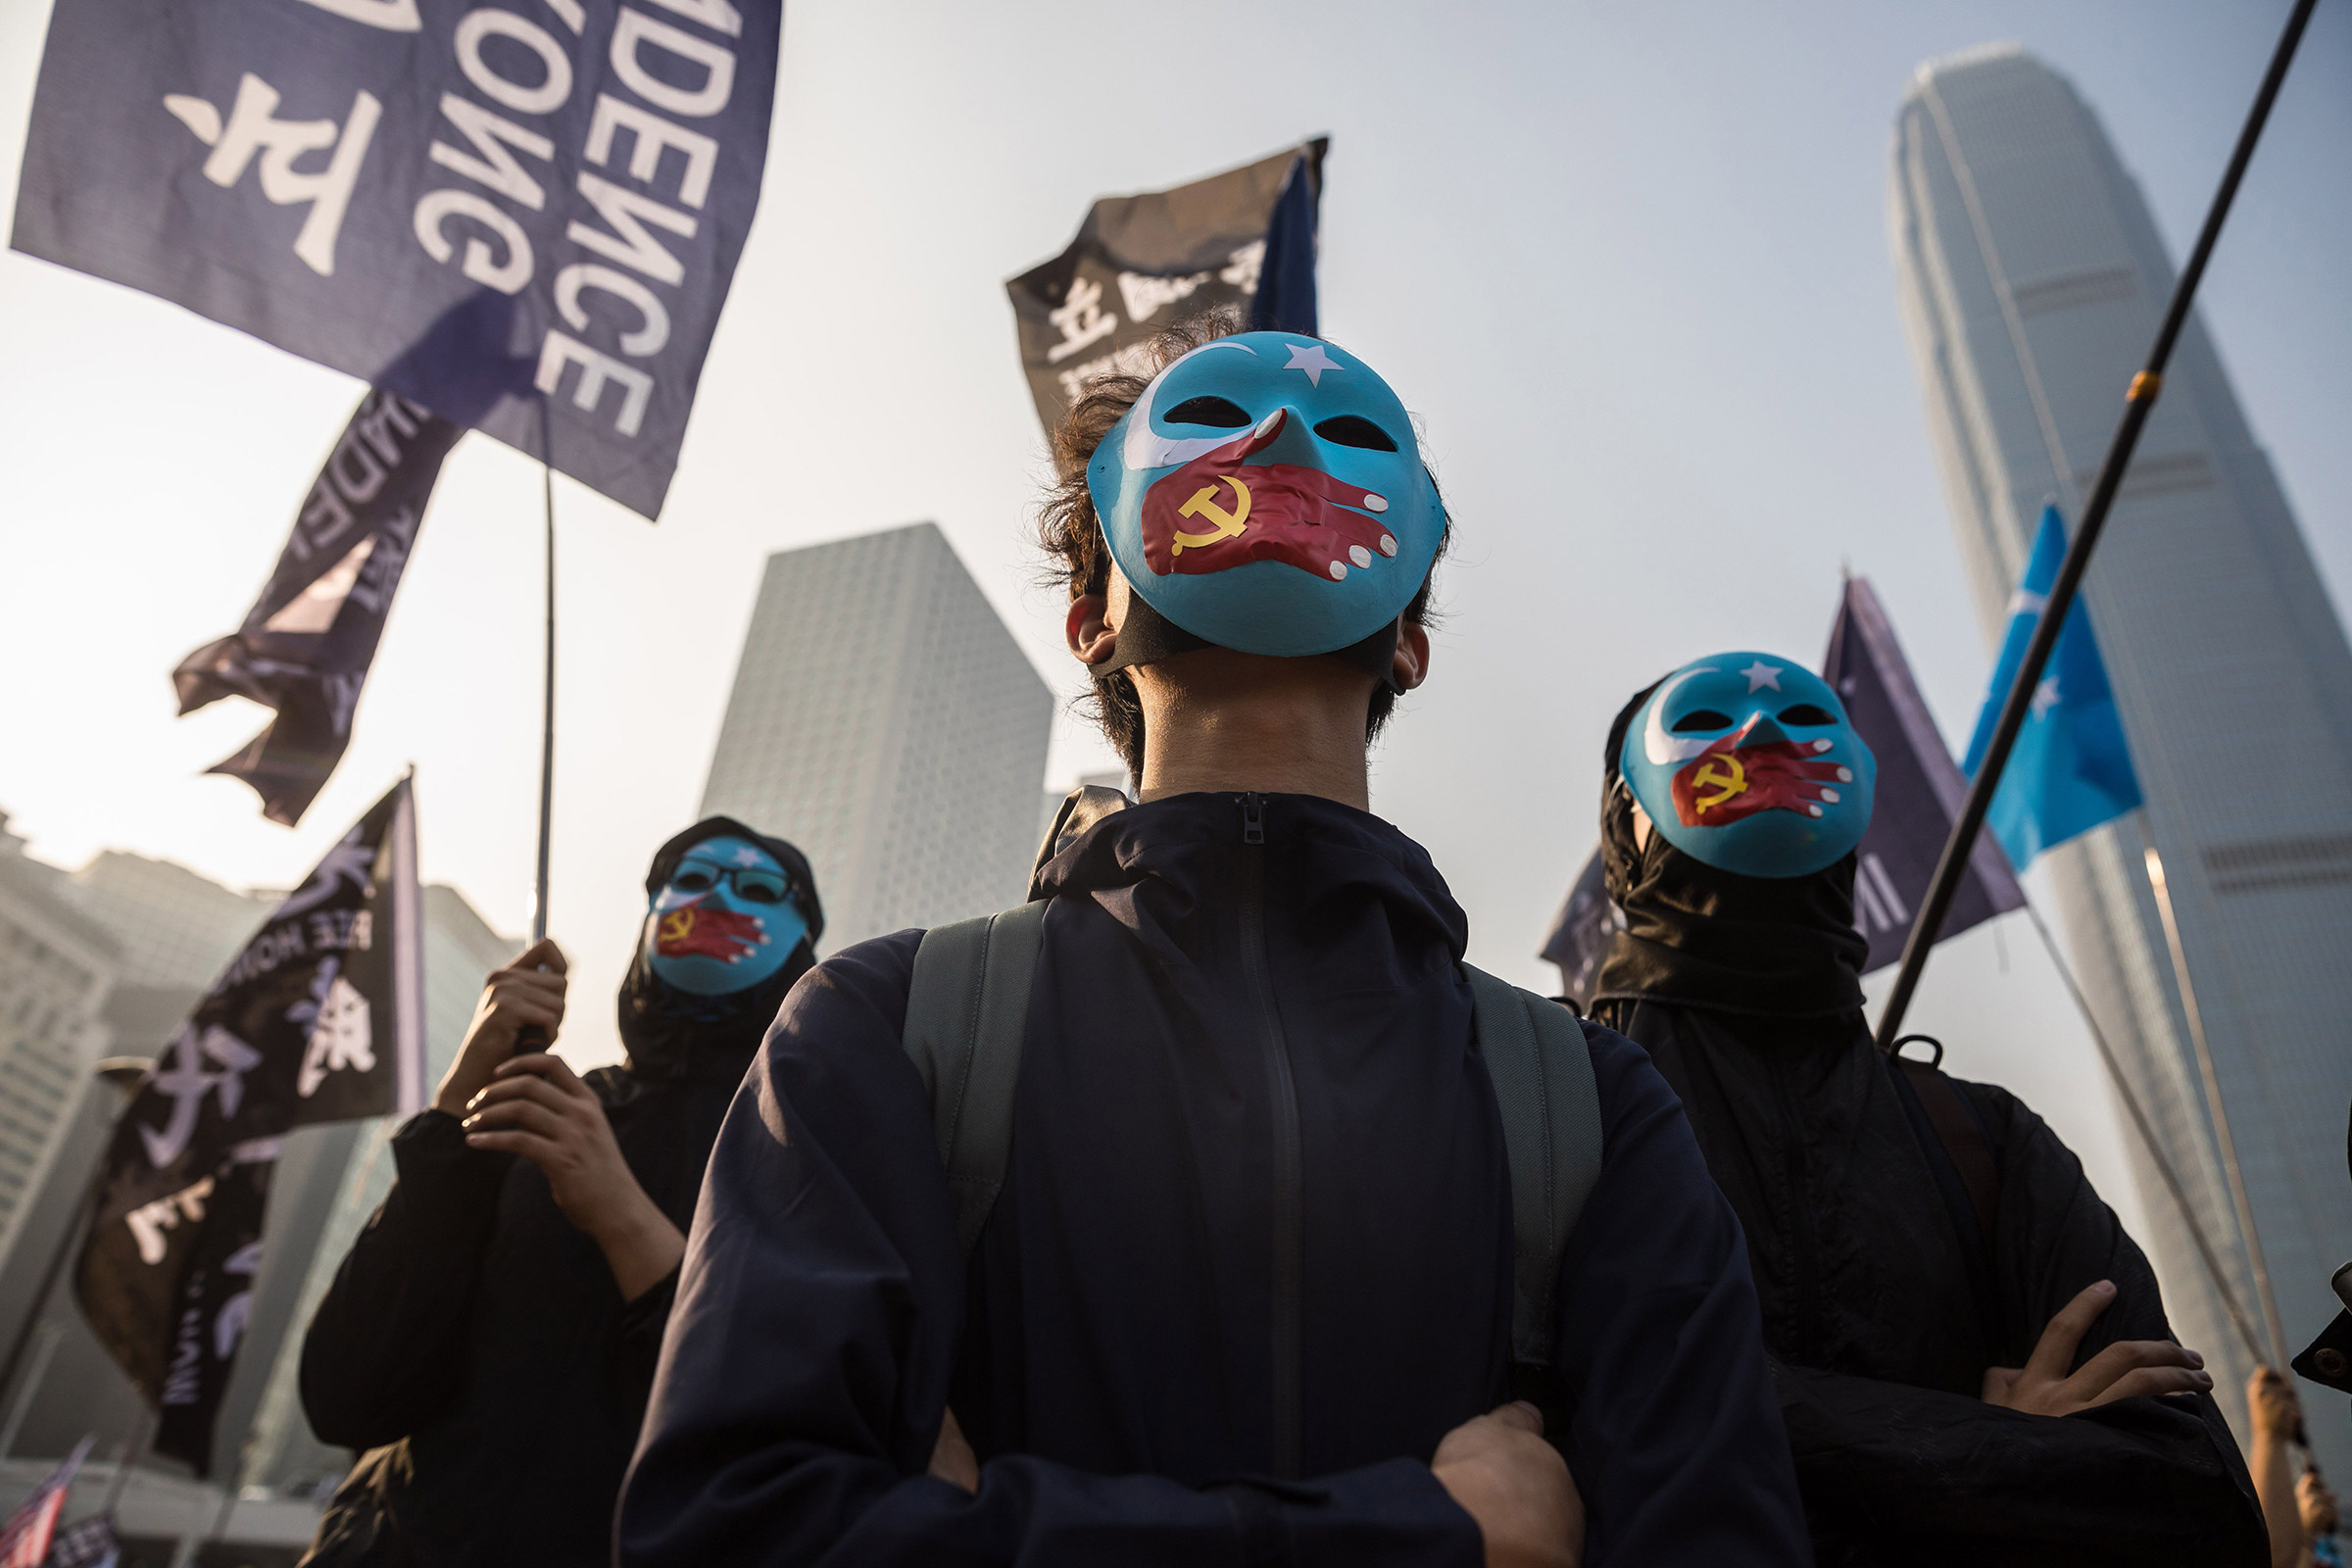 Protesters attend a rally in Hong Kong to show support for the Uighur minority in China on Dec. 22, 2019. (Dale de la Rey—AFP/Getty Images)